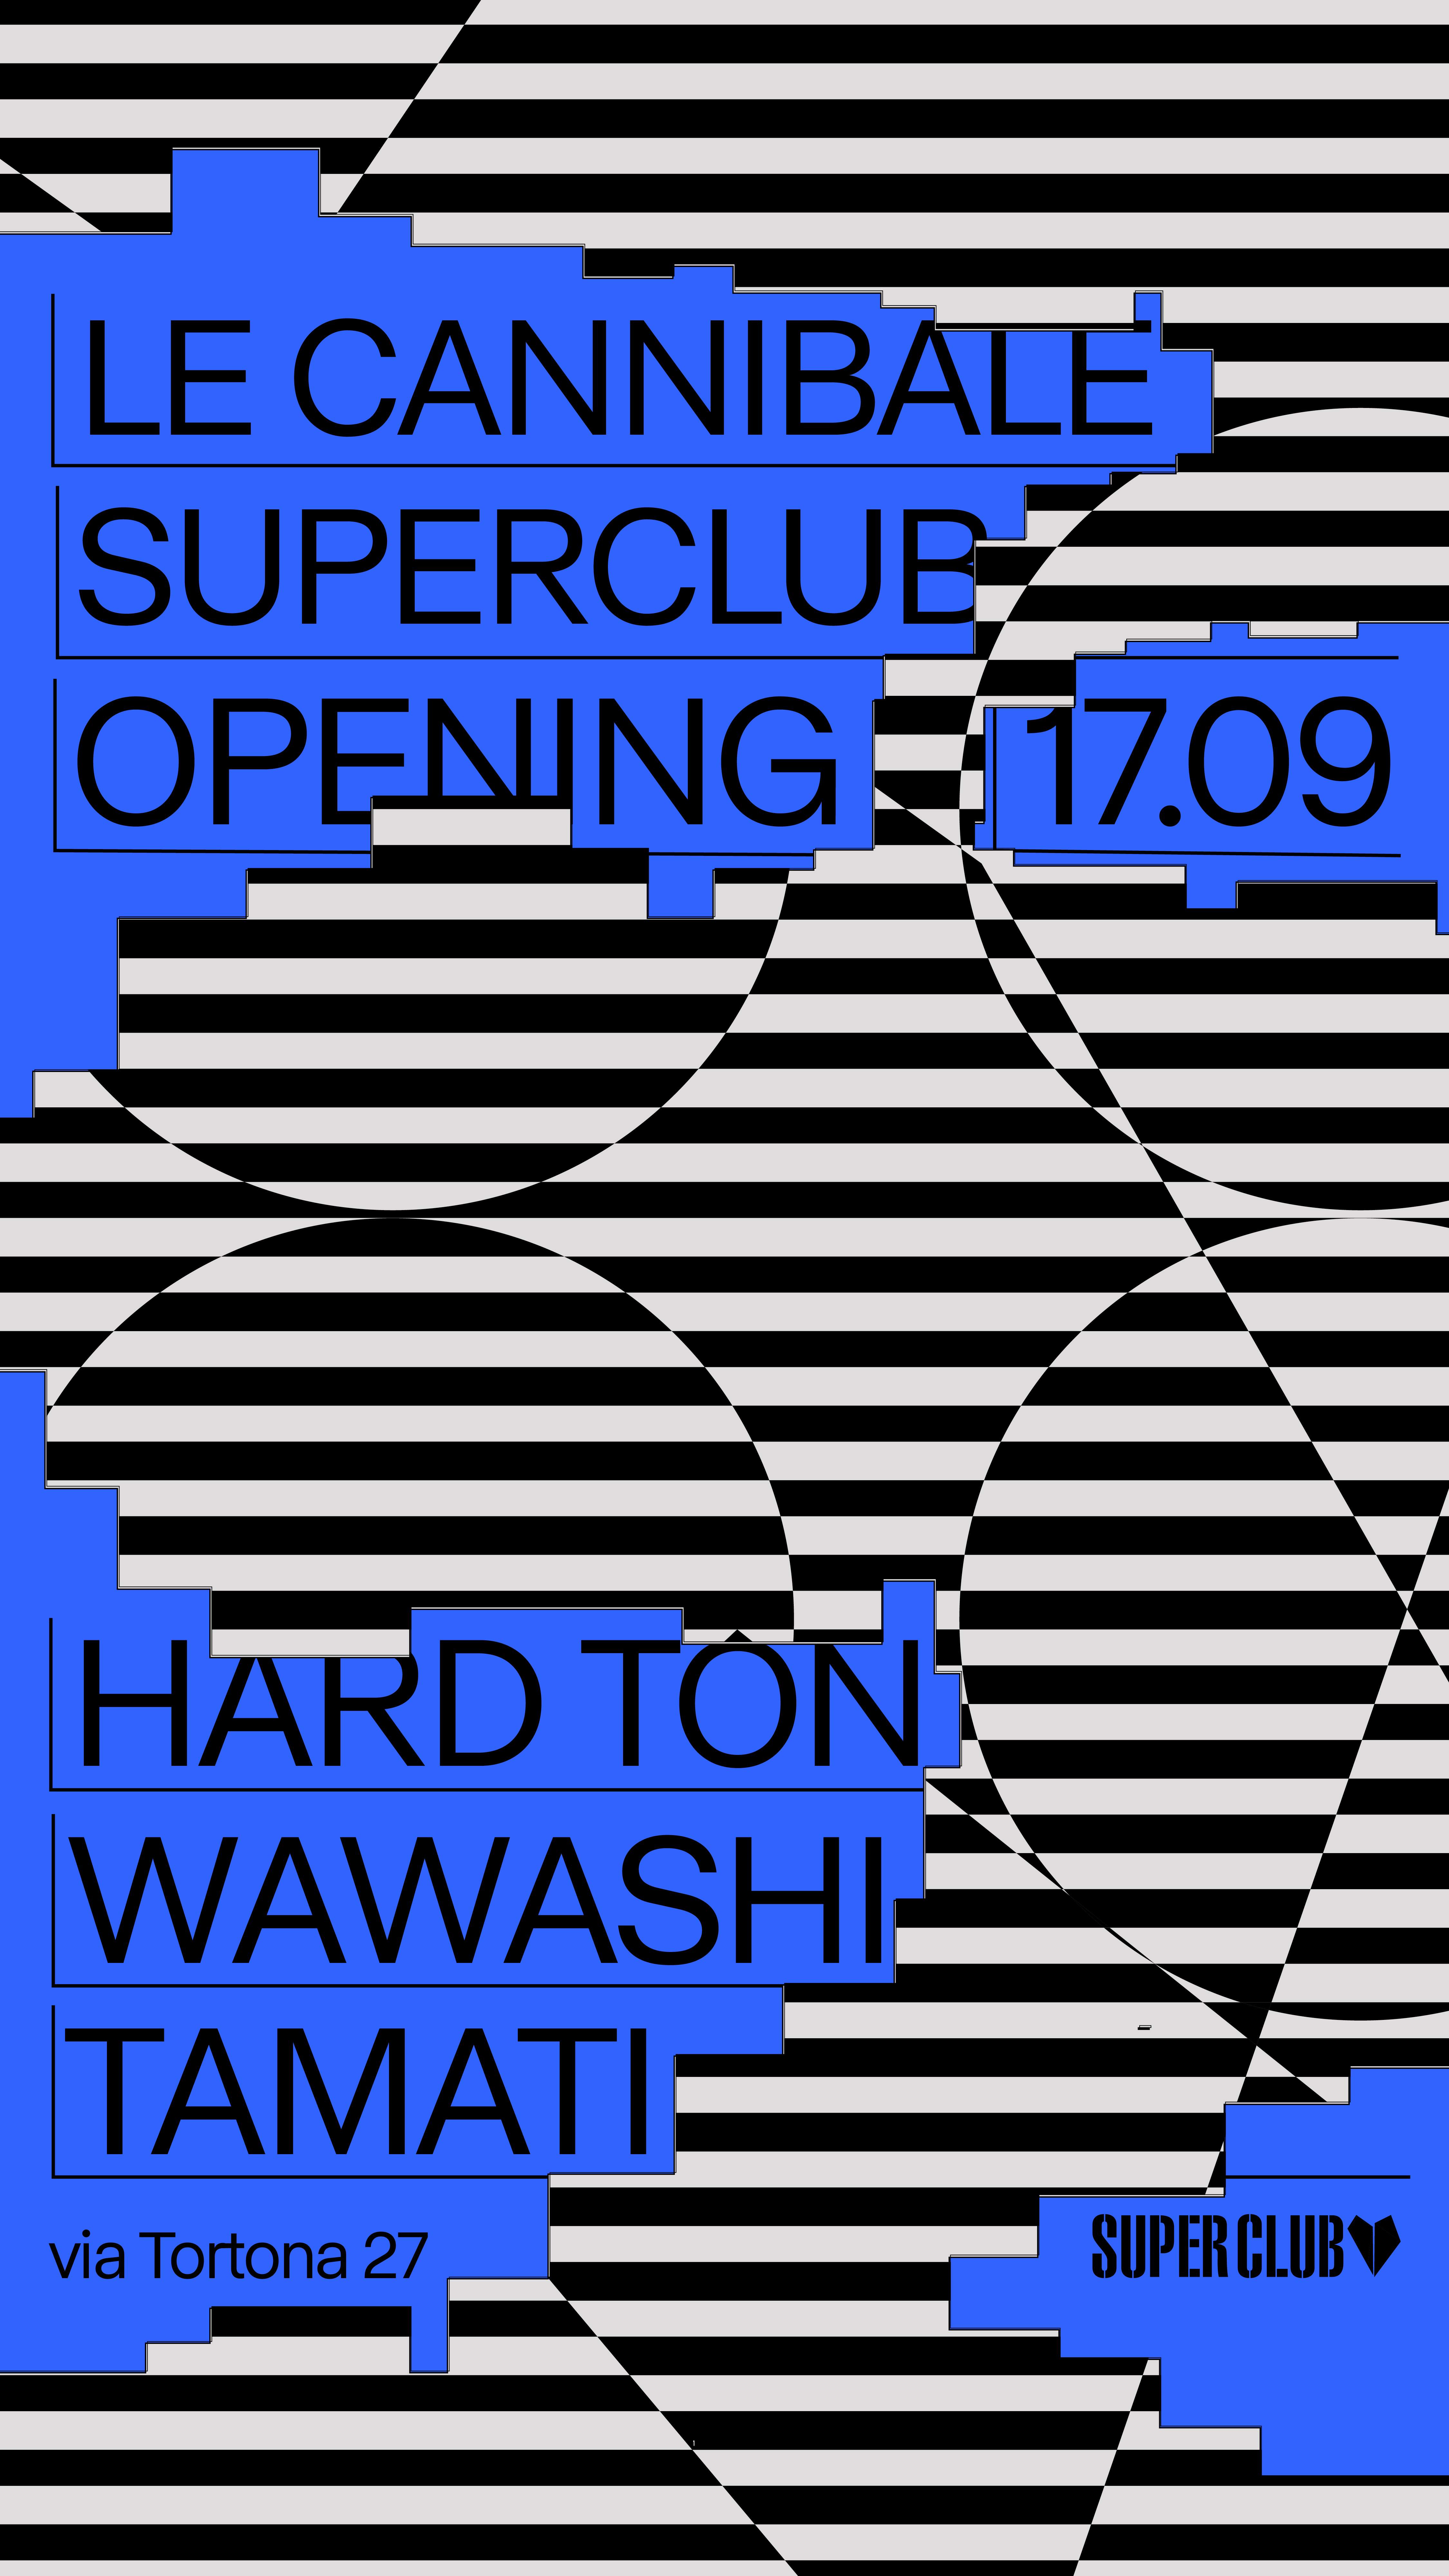 Le Cannibale Superclub - Opening - フライヤー裏